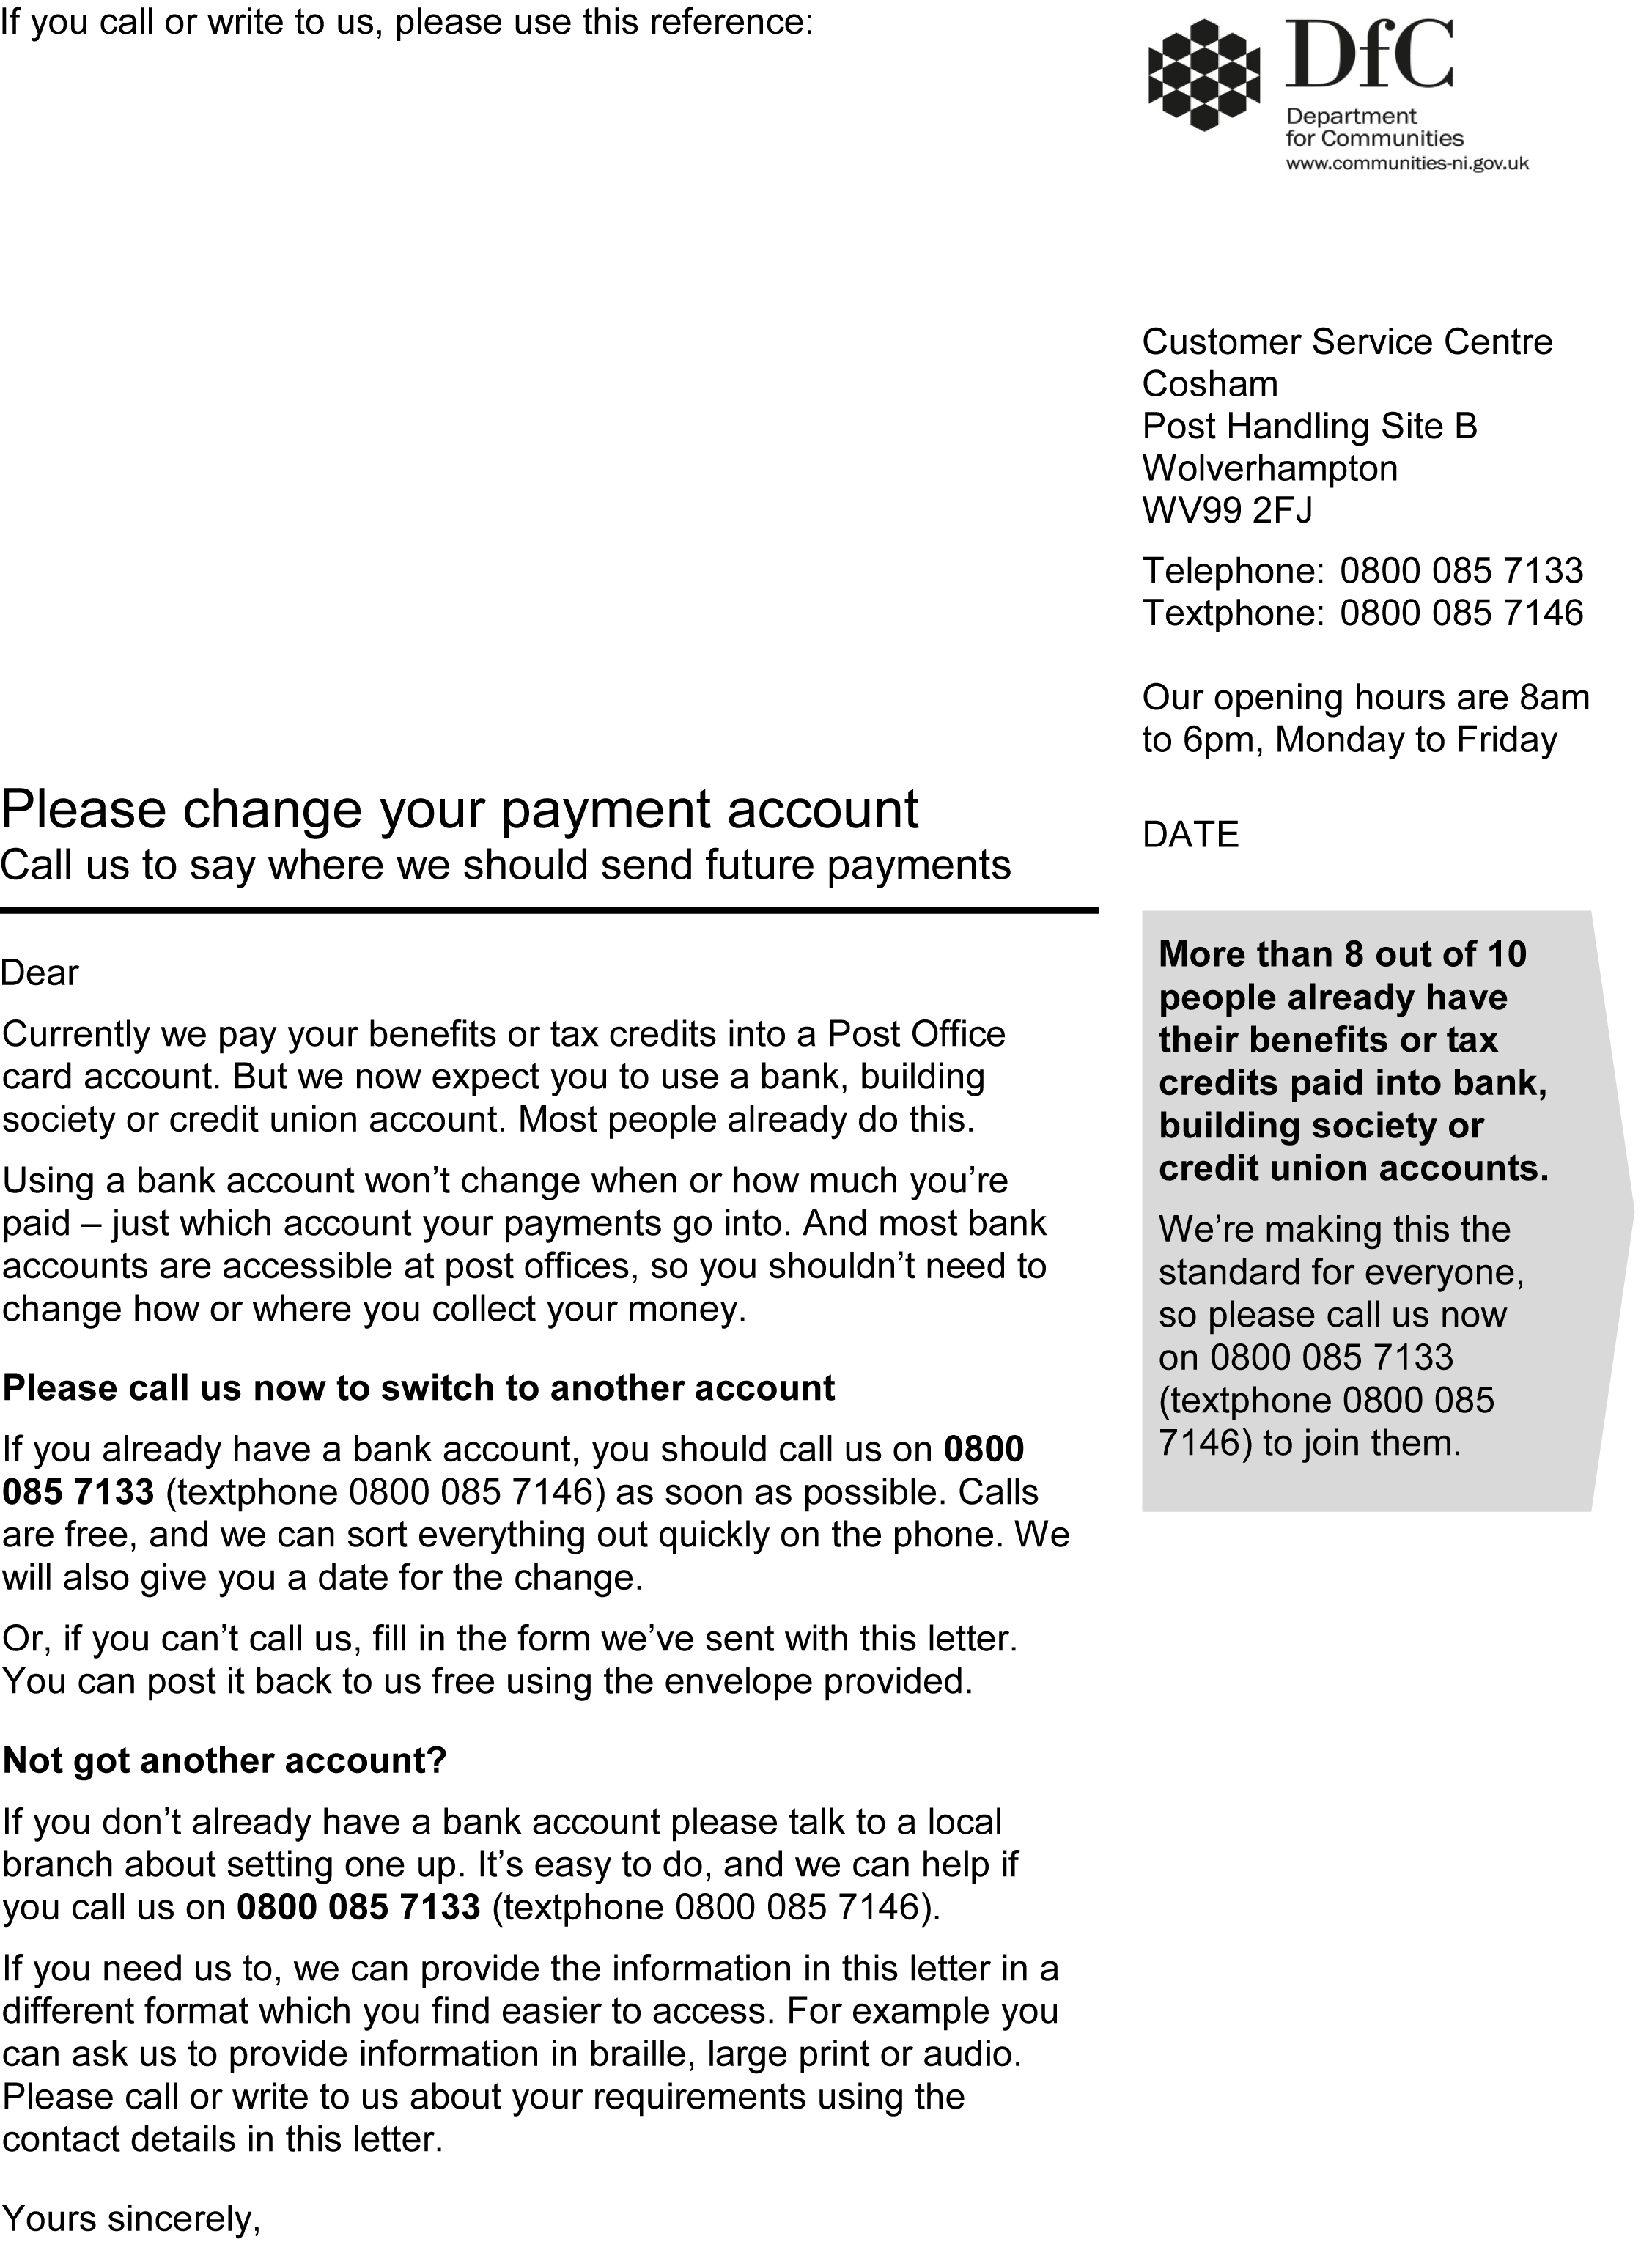 Department confirms validity of payment account letter to ...